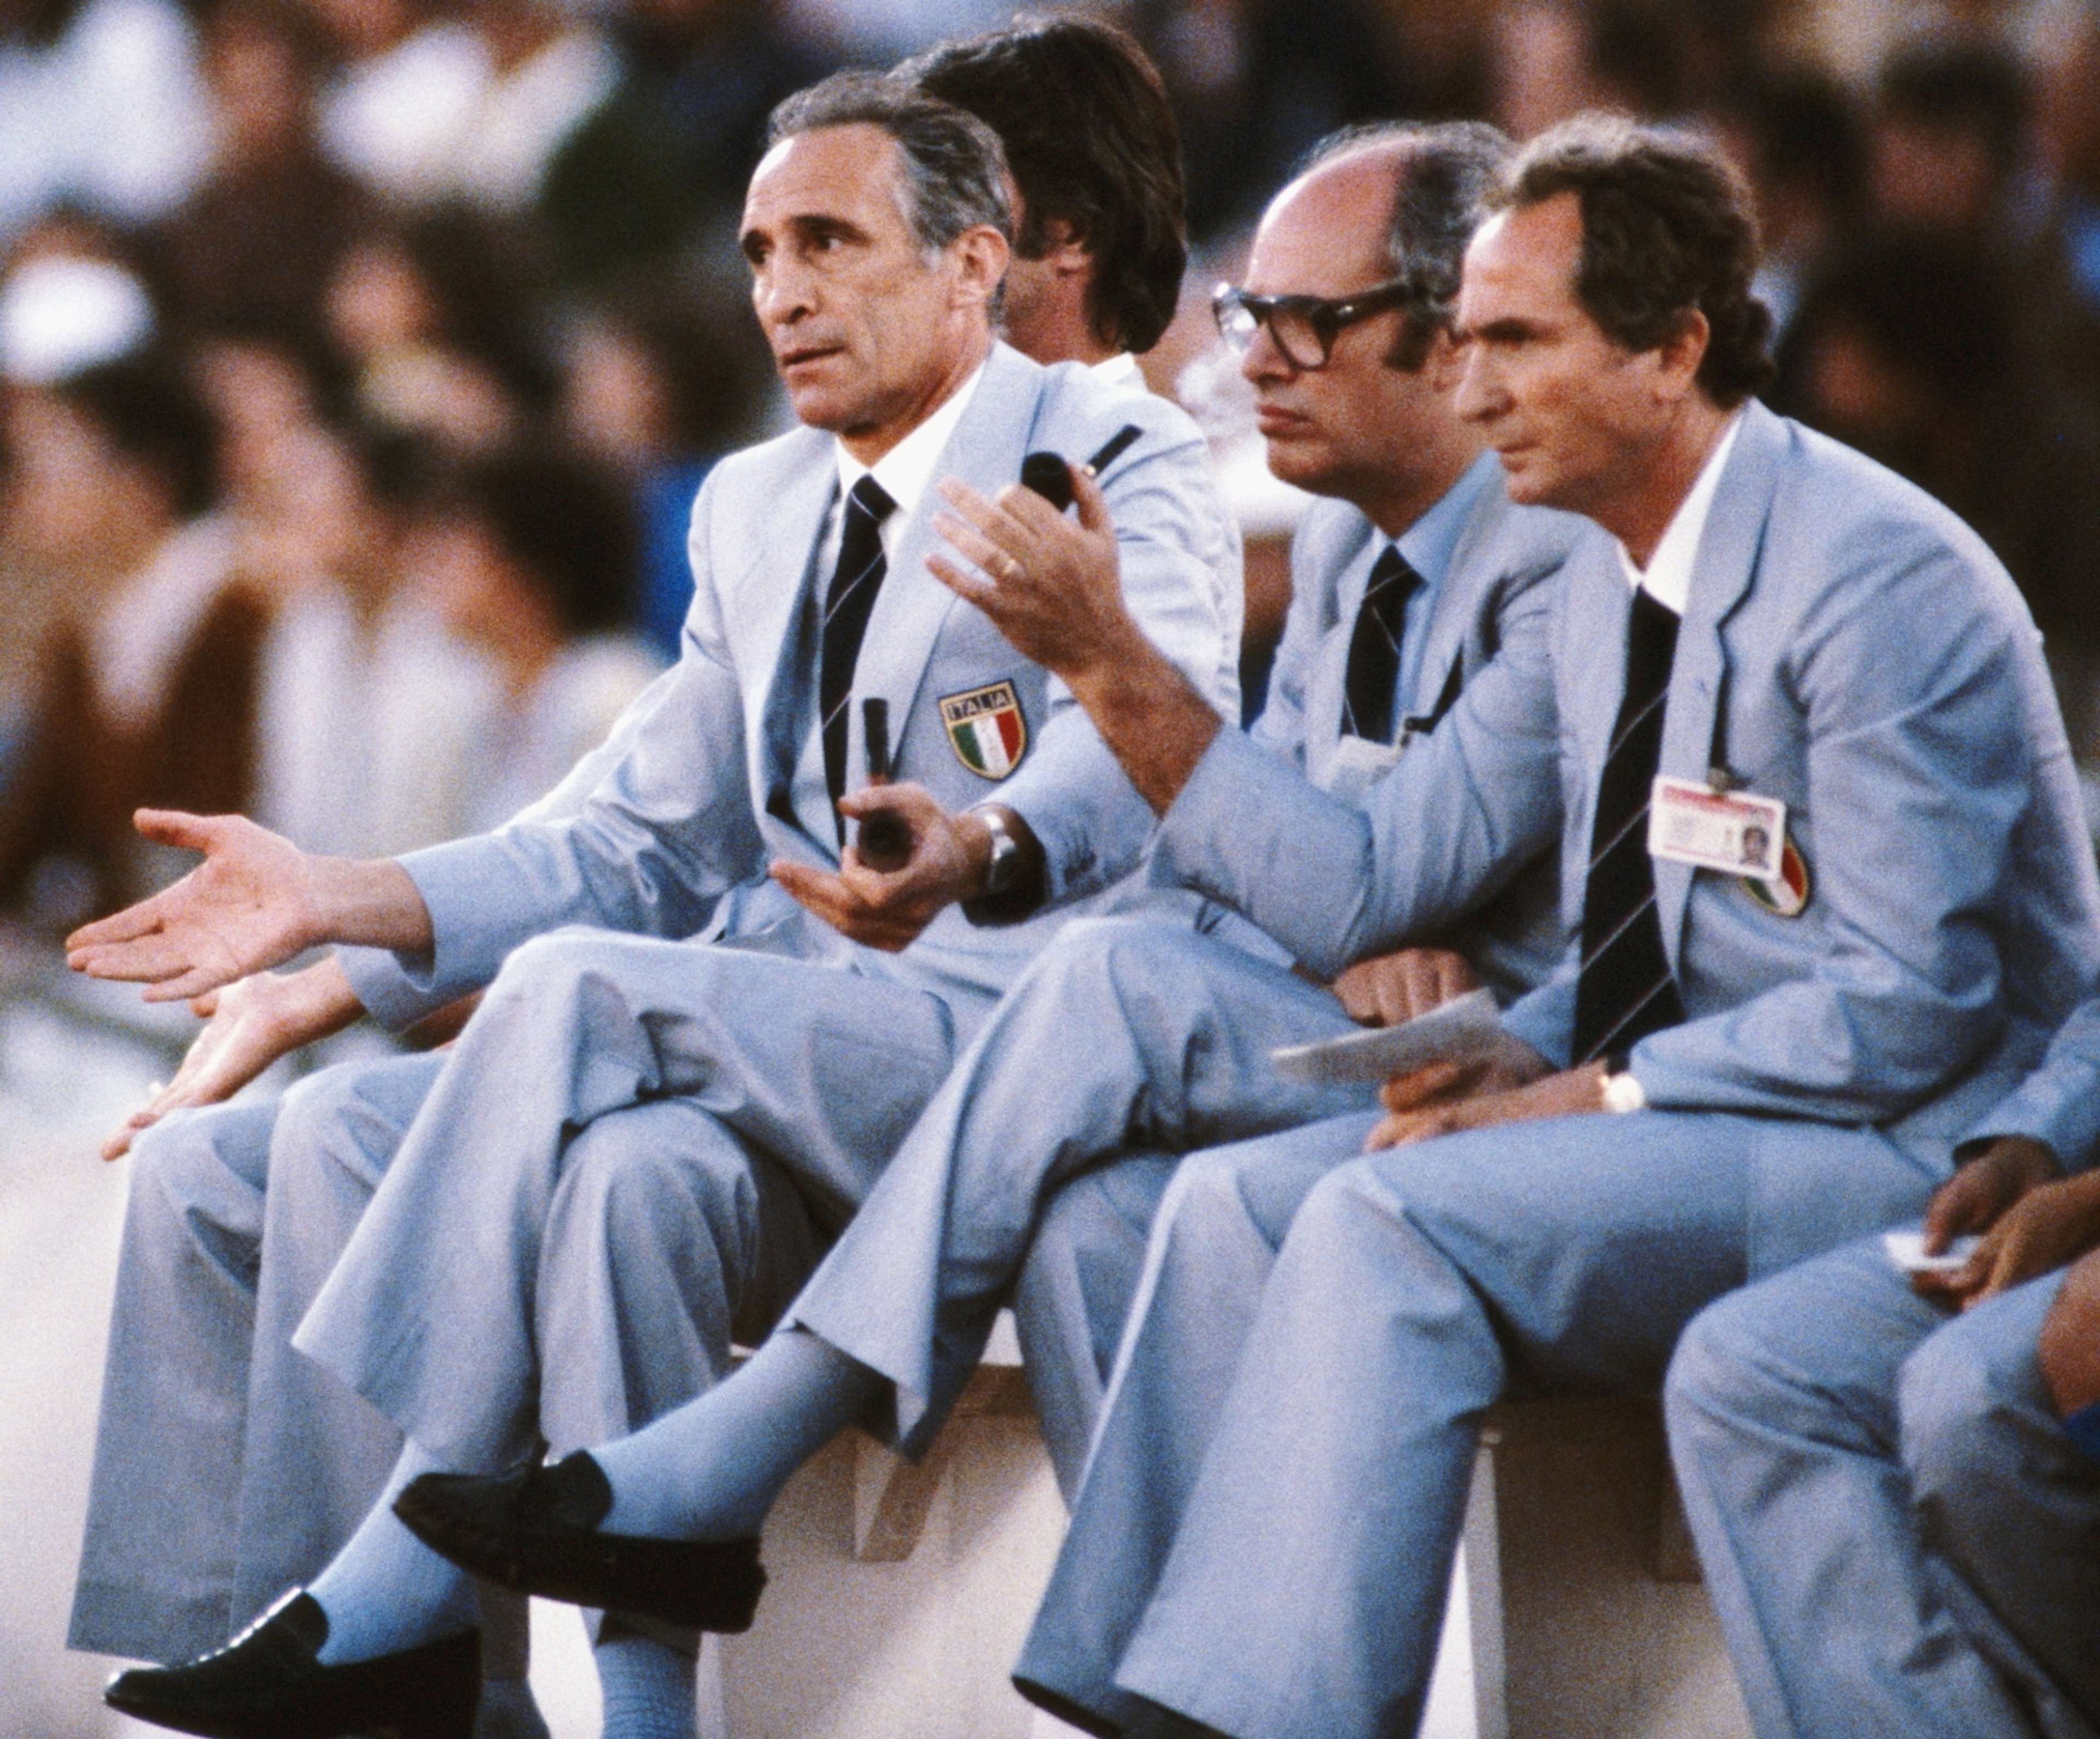 EMBED ONLY: Enzo Bearzot and staff